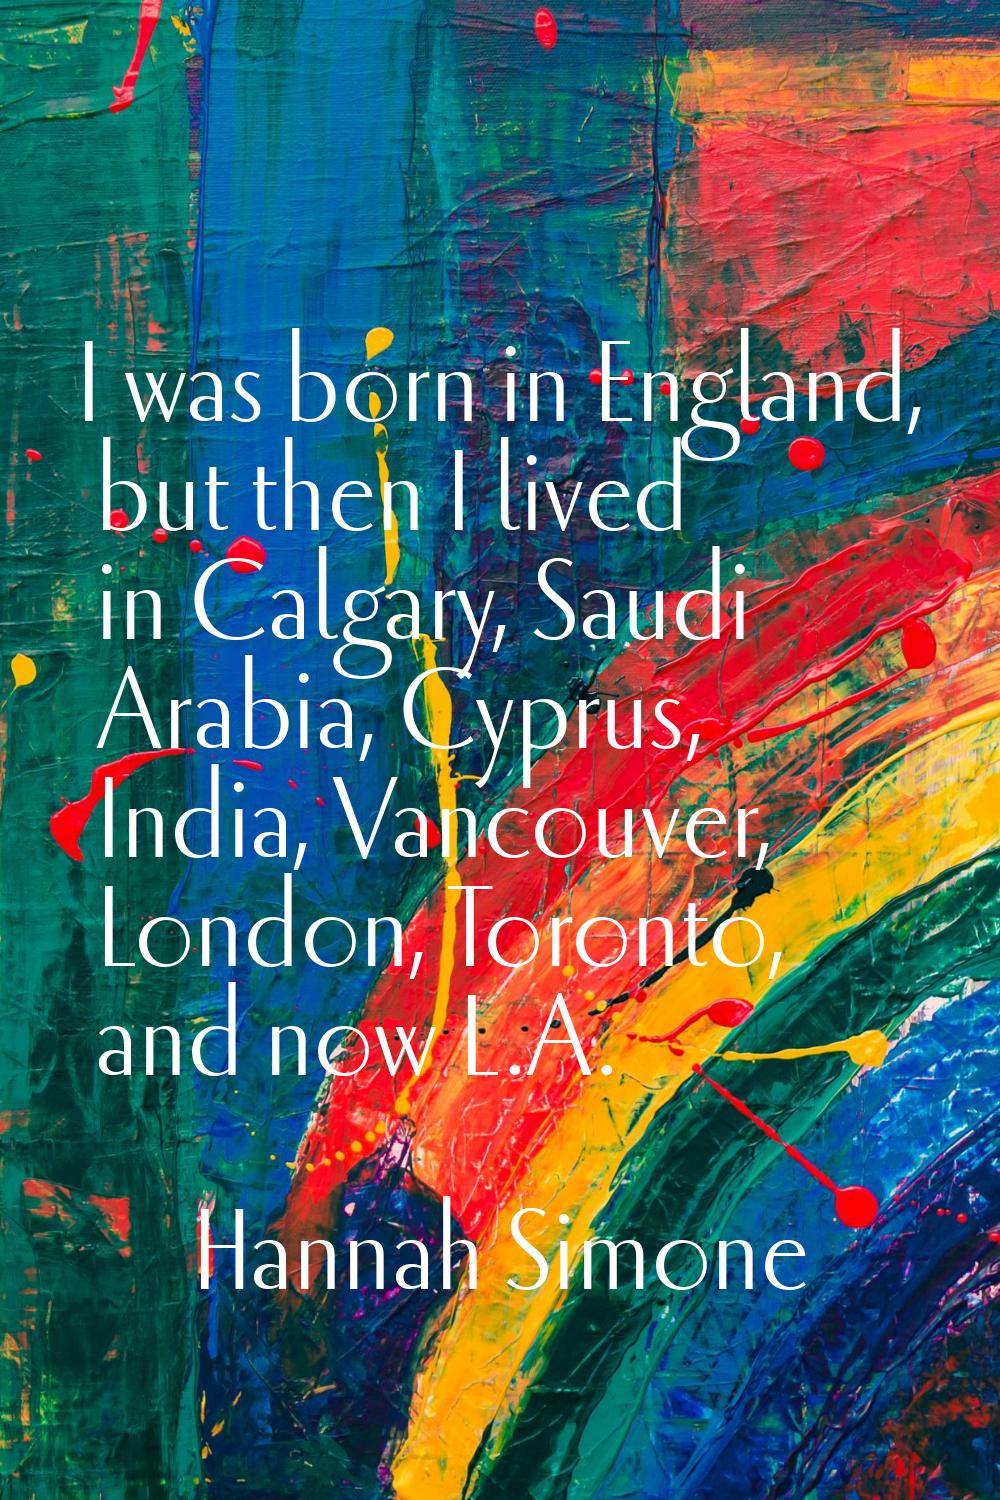 I was born in England, but then I lived in Calgary, Saudi Arabia, Cyprus, India, Vancouver, London,